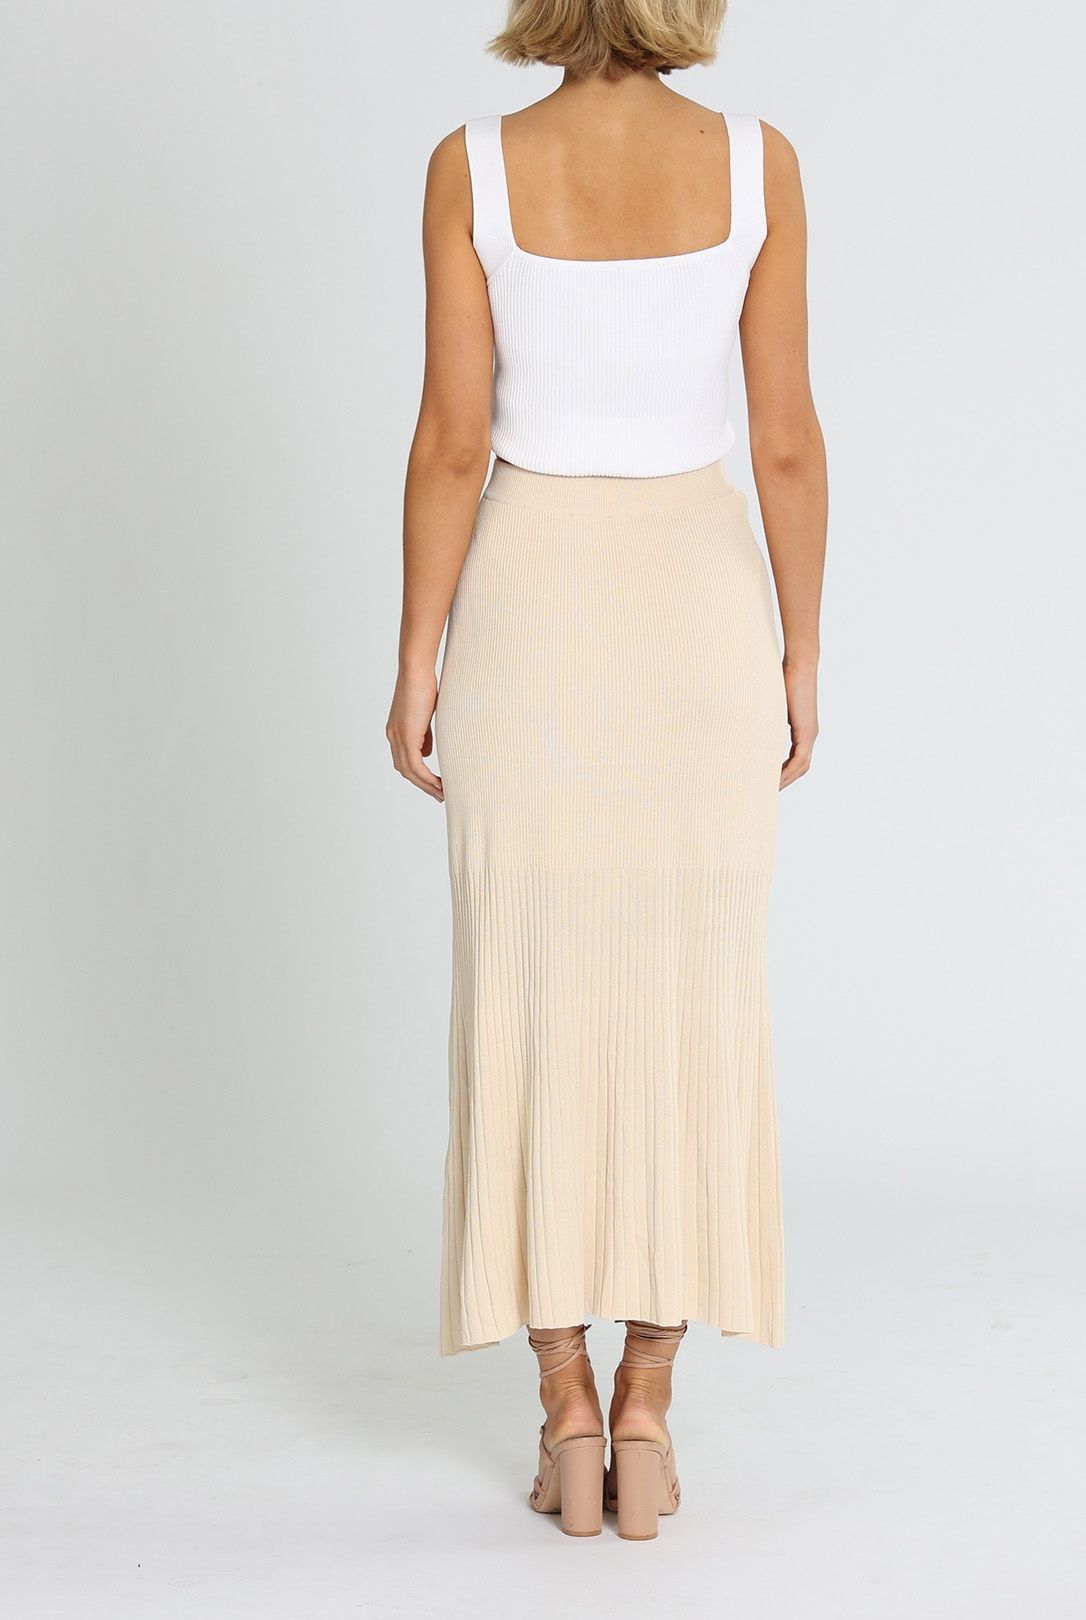 Alice McCall Michelle Skirt Nude Fitted Waistband